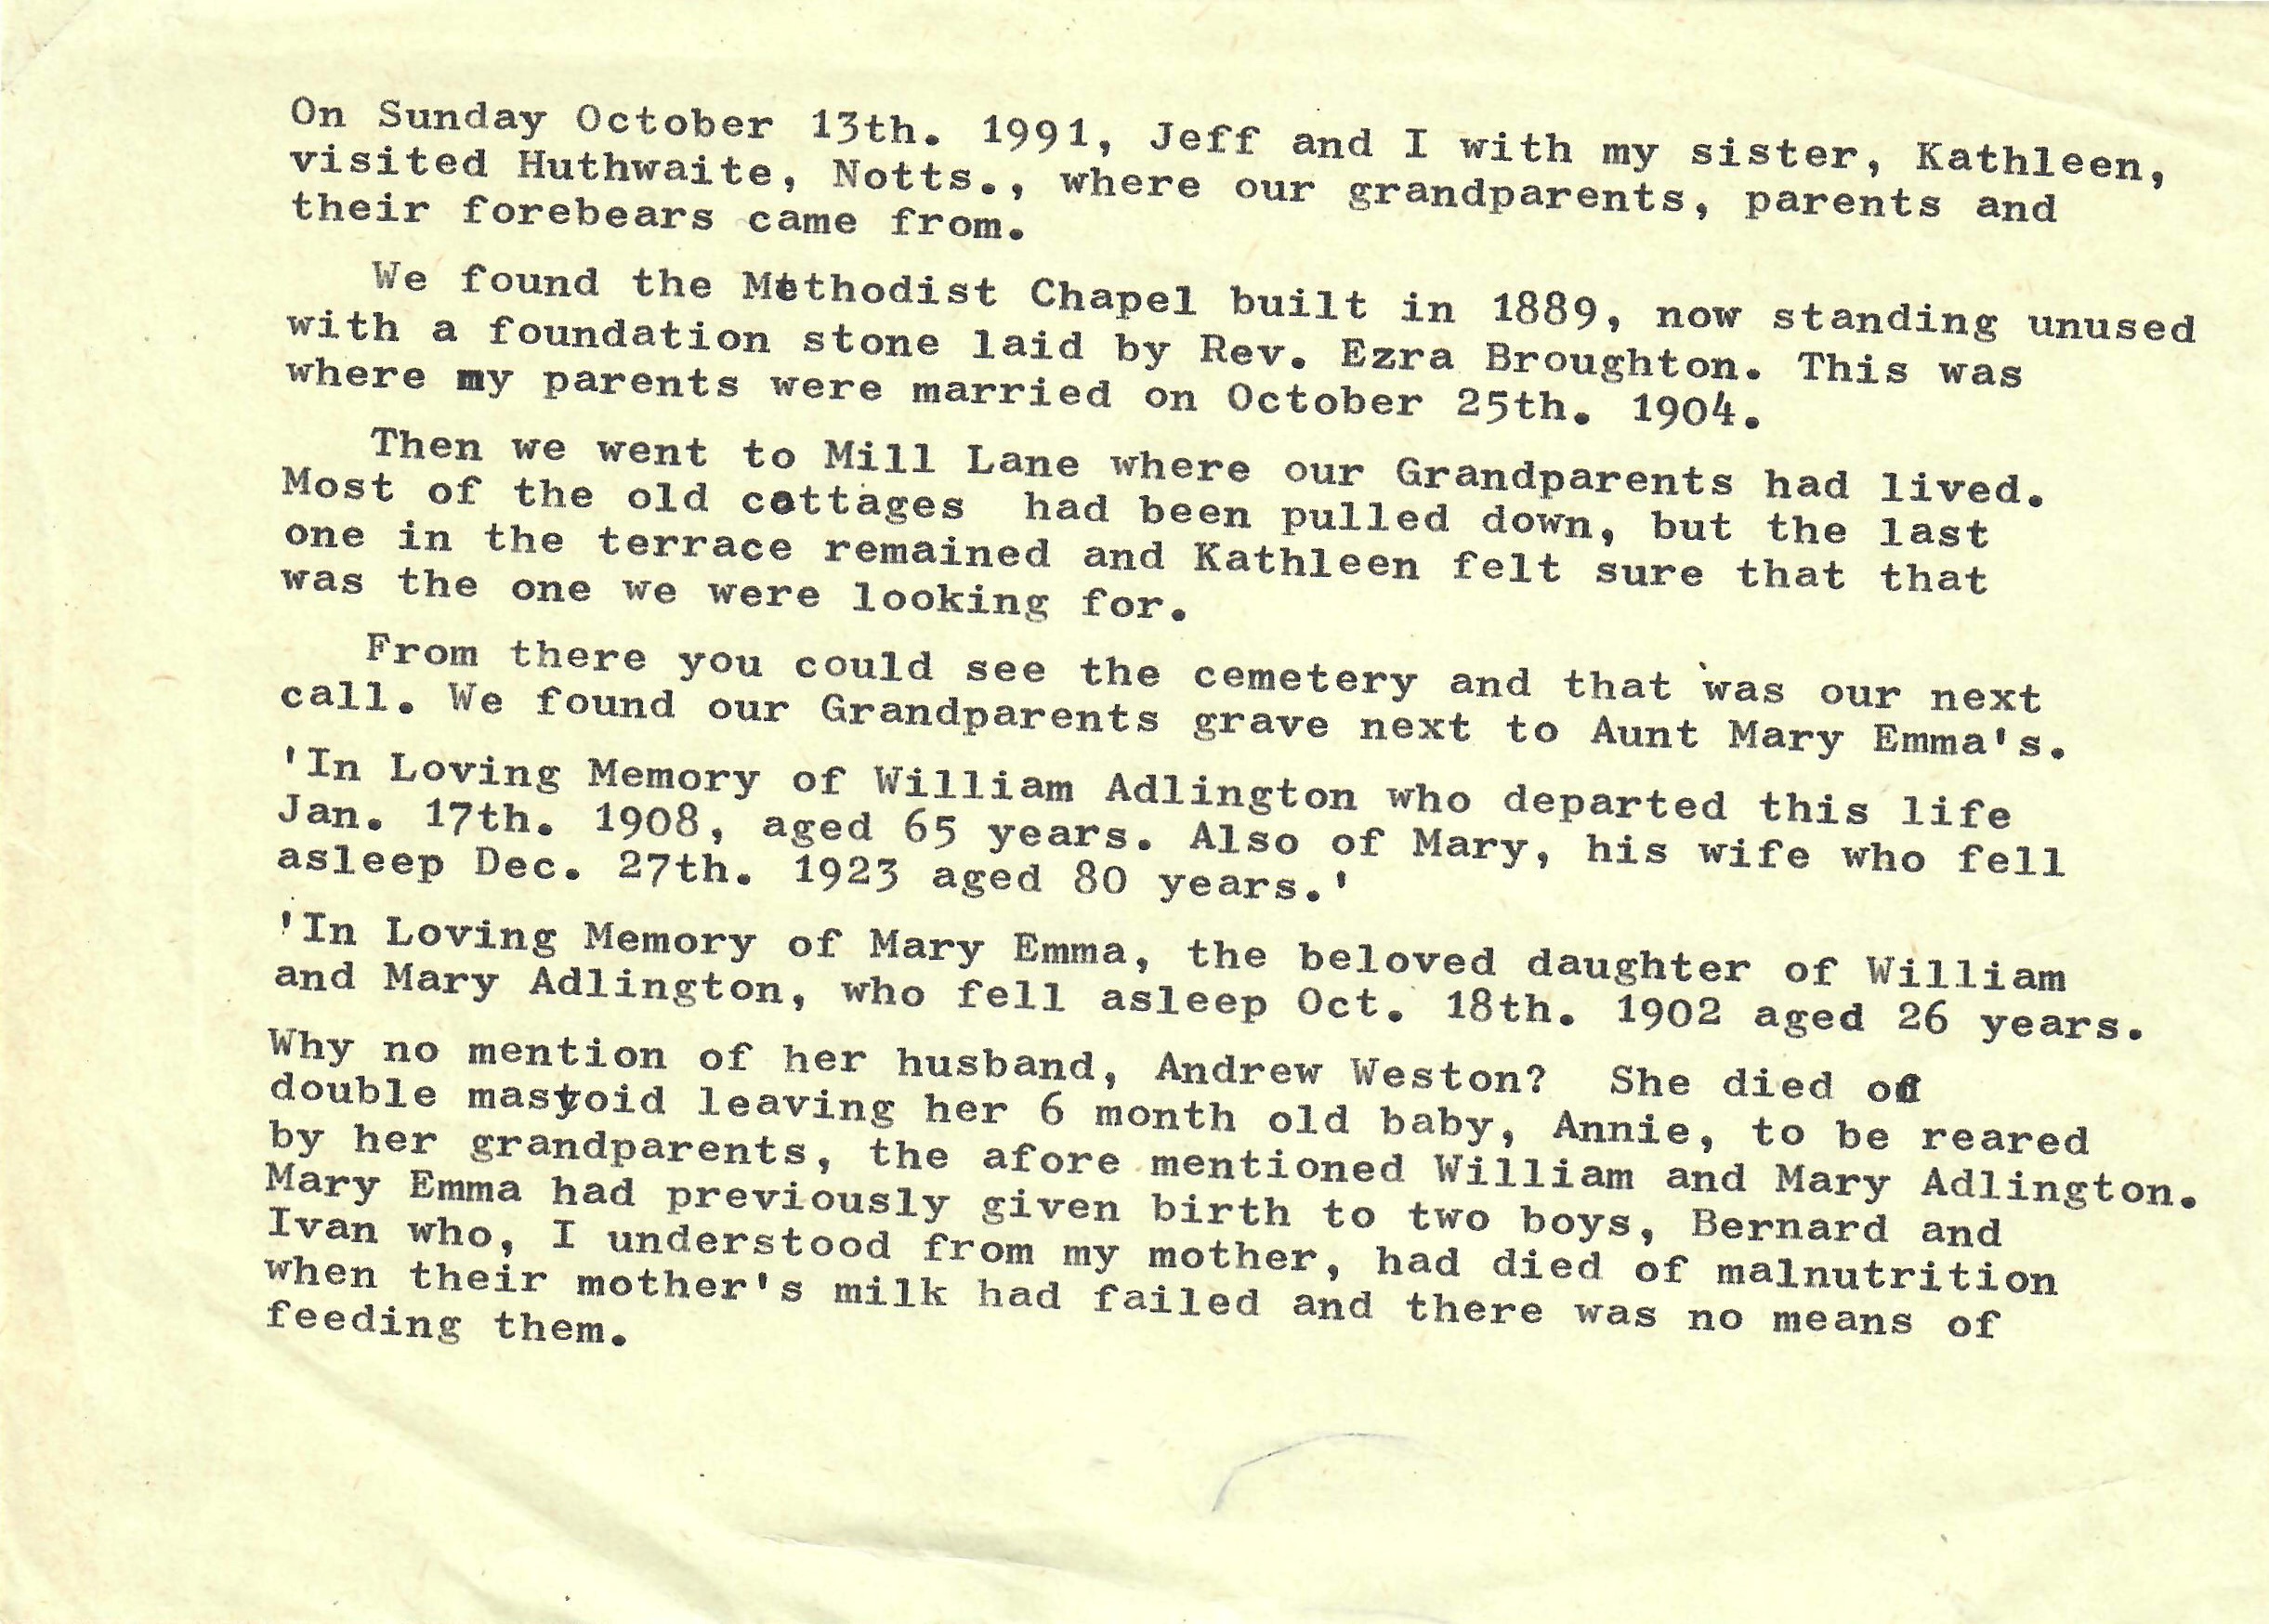 Note from Joan Gray on a visit to the Methodist Chapel at Huthwaite 